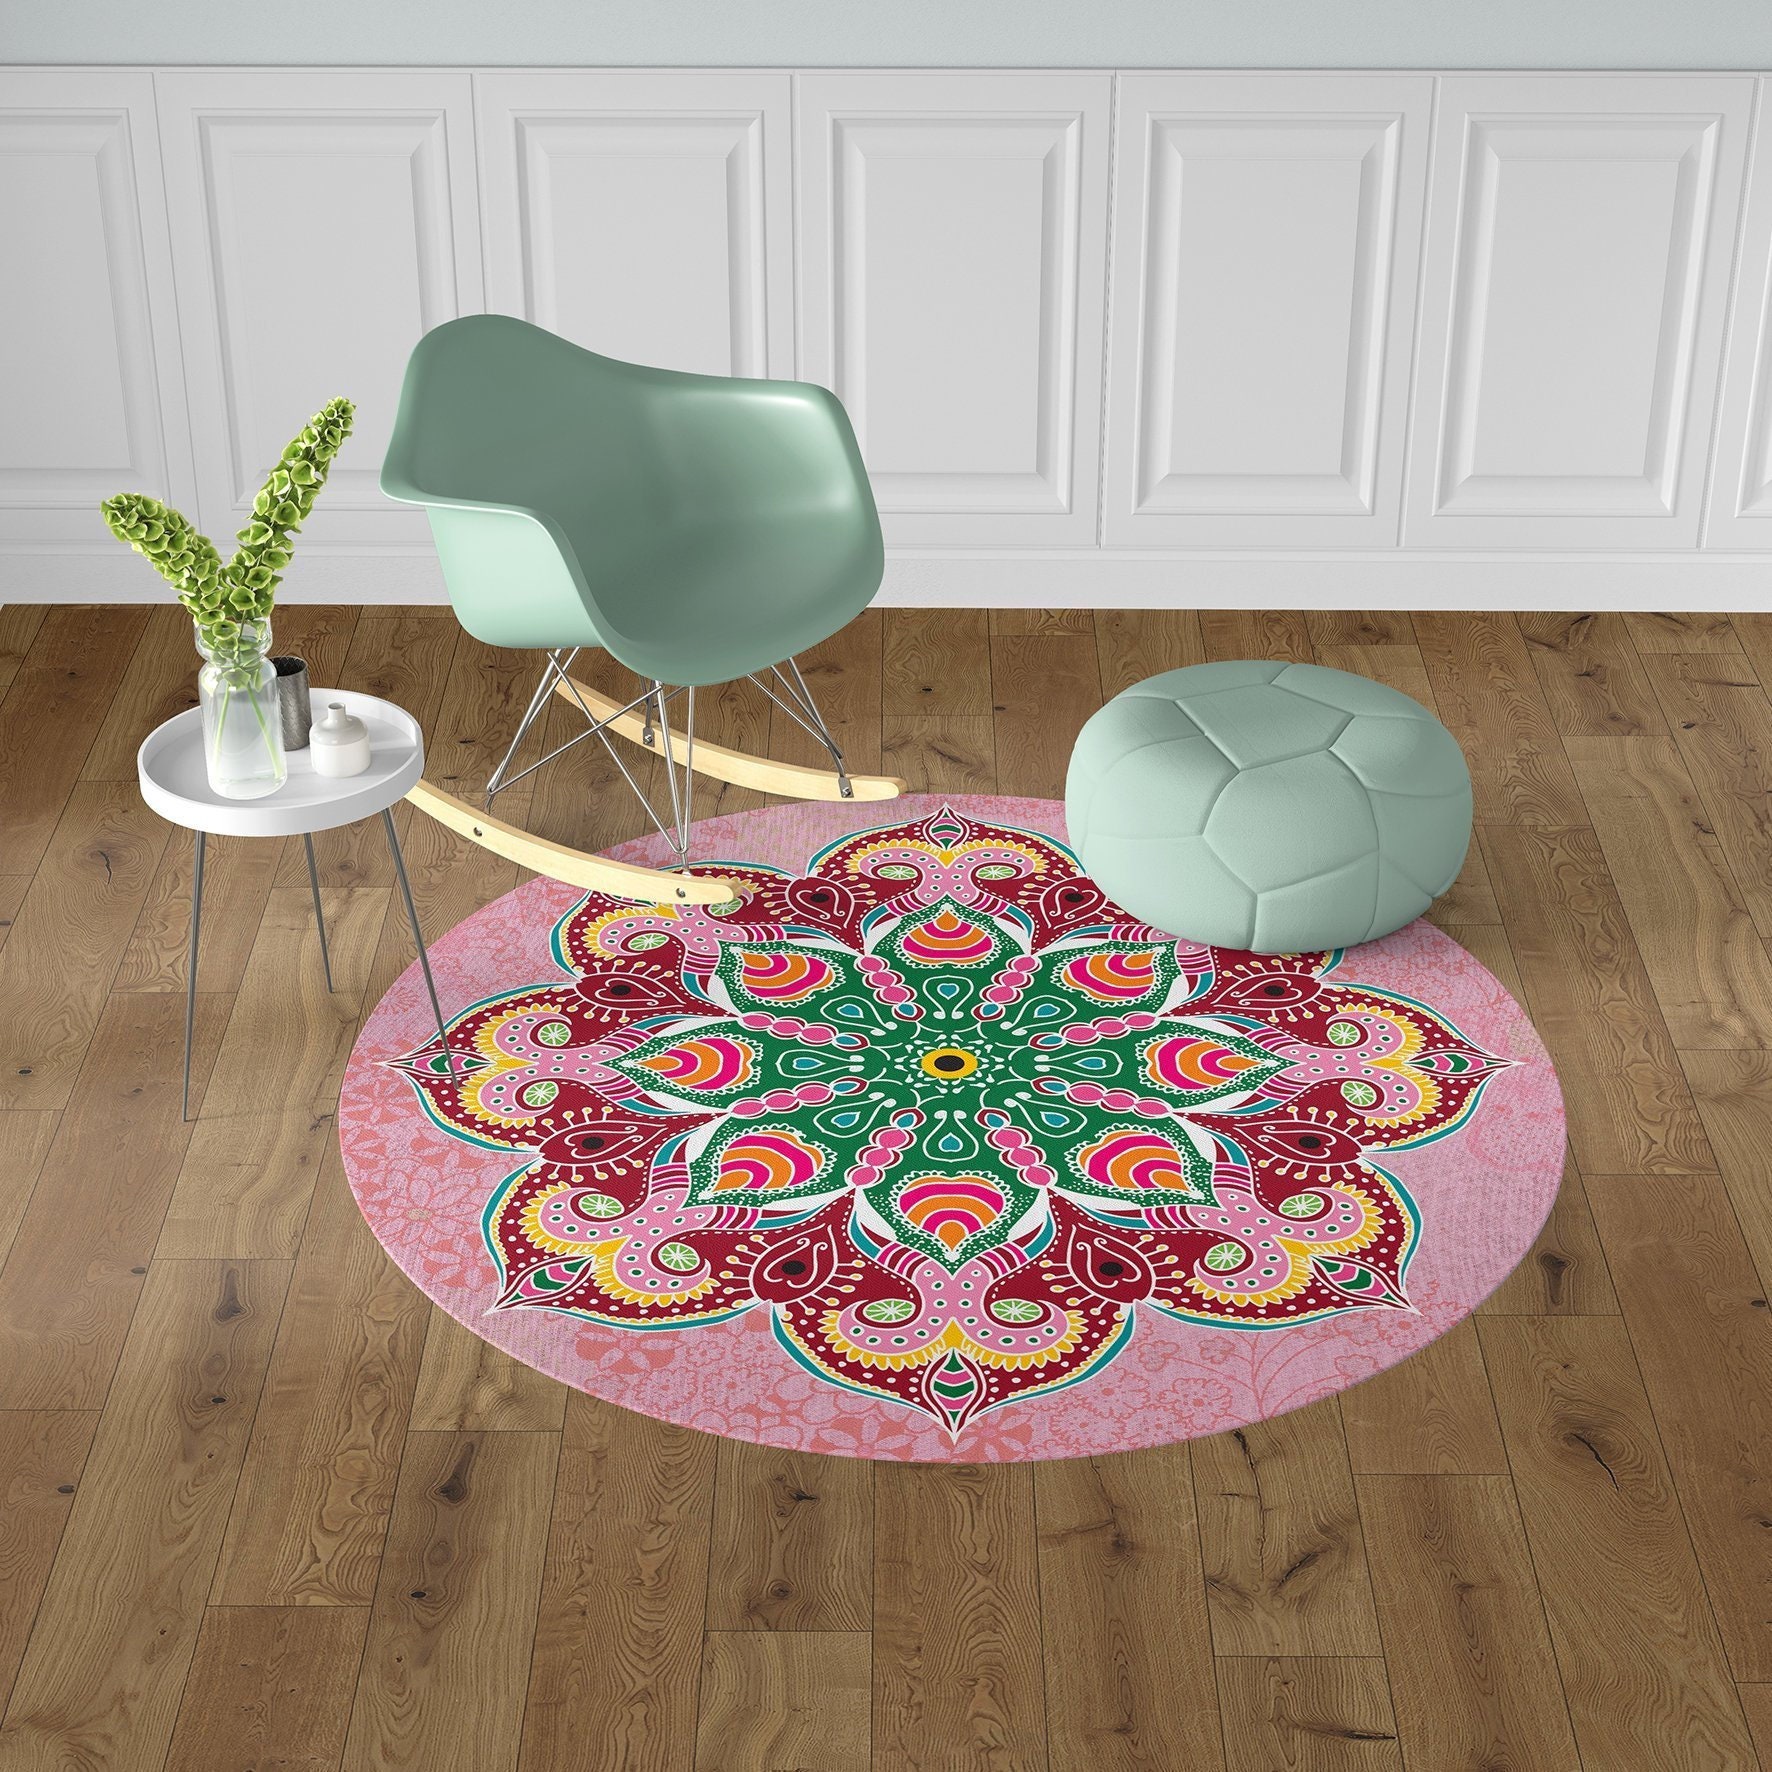 YJHDL Ethnic Tribal Floral Mandala Area Rugs Non Slip Area Carpet 31x20 Inches Area Rug for Bedroom Living Room Home 